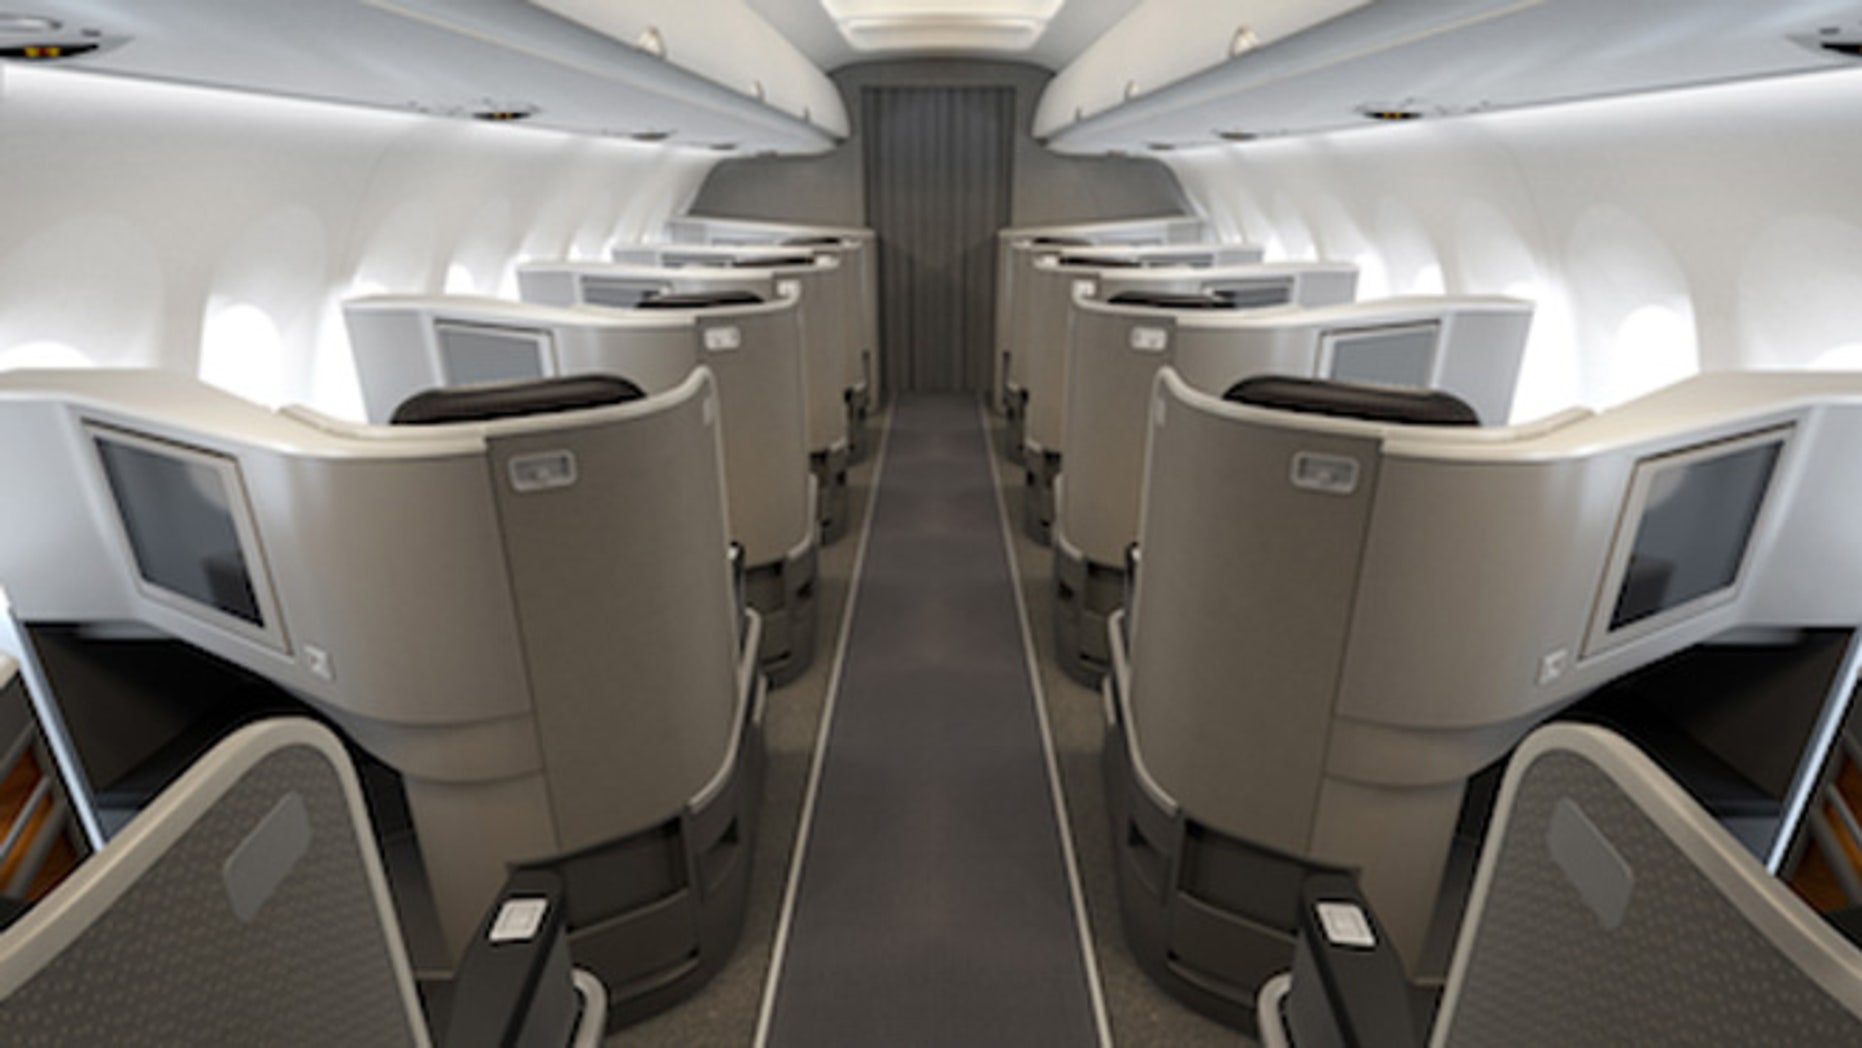 A private realm American Airlines' new transcontinental service in